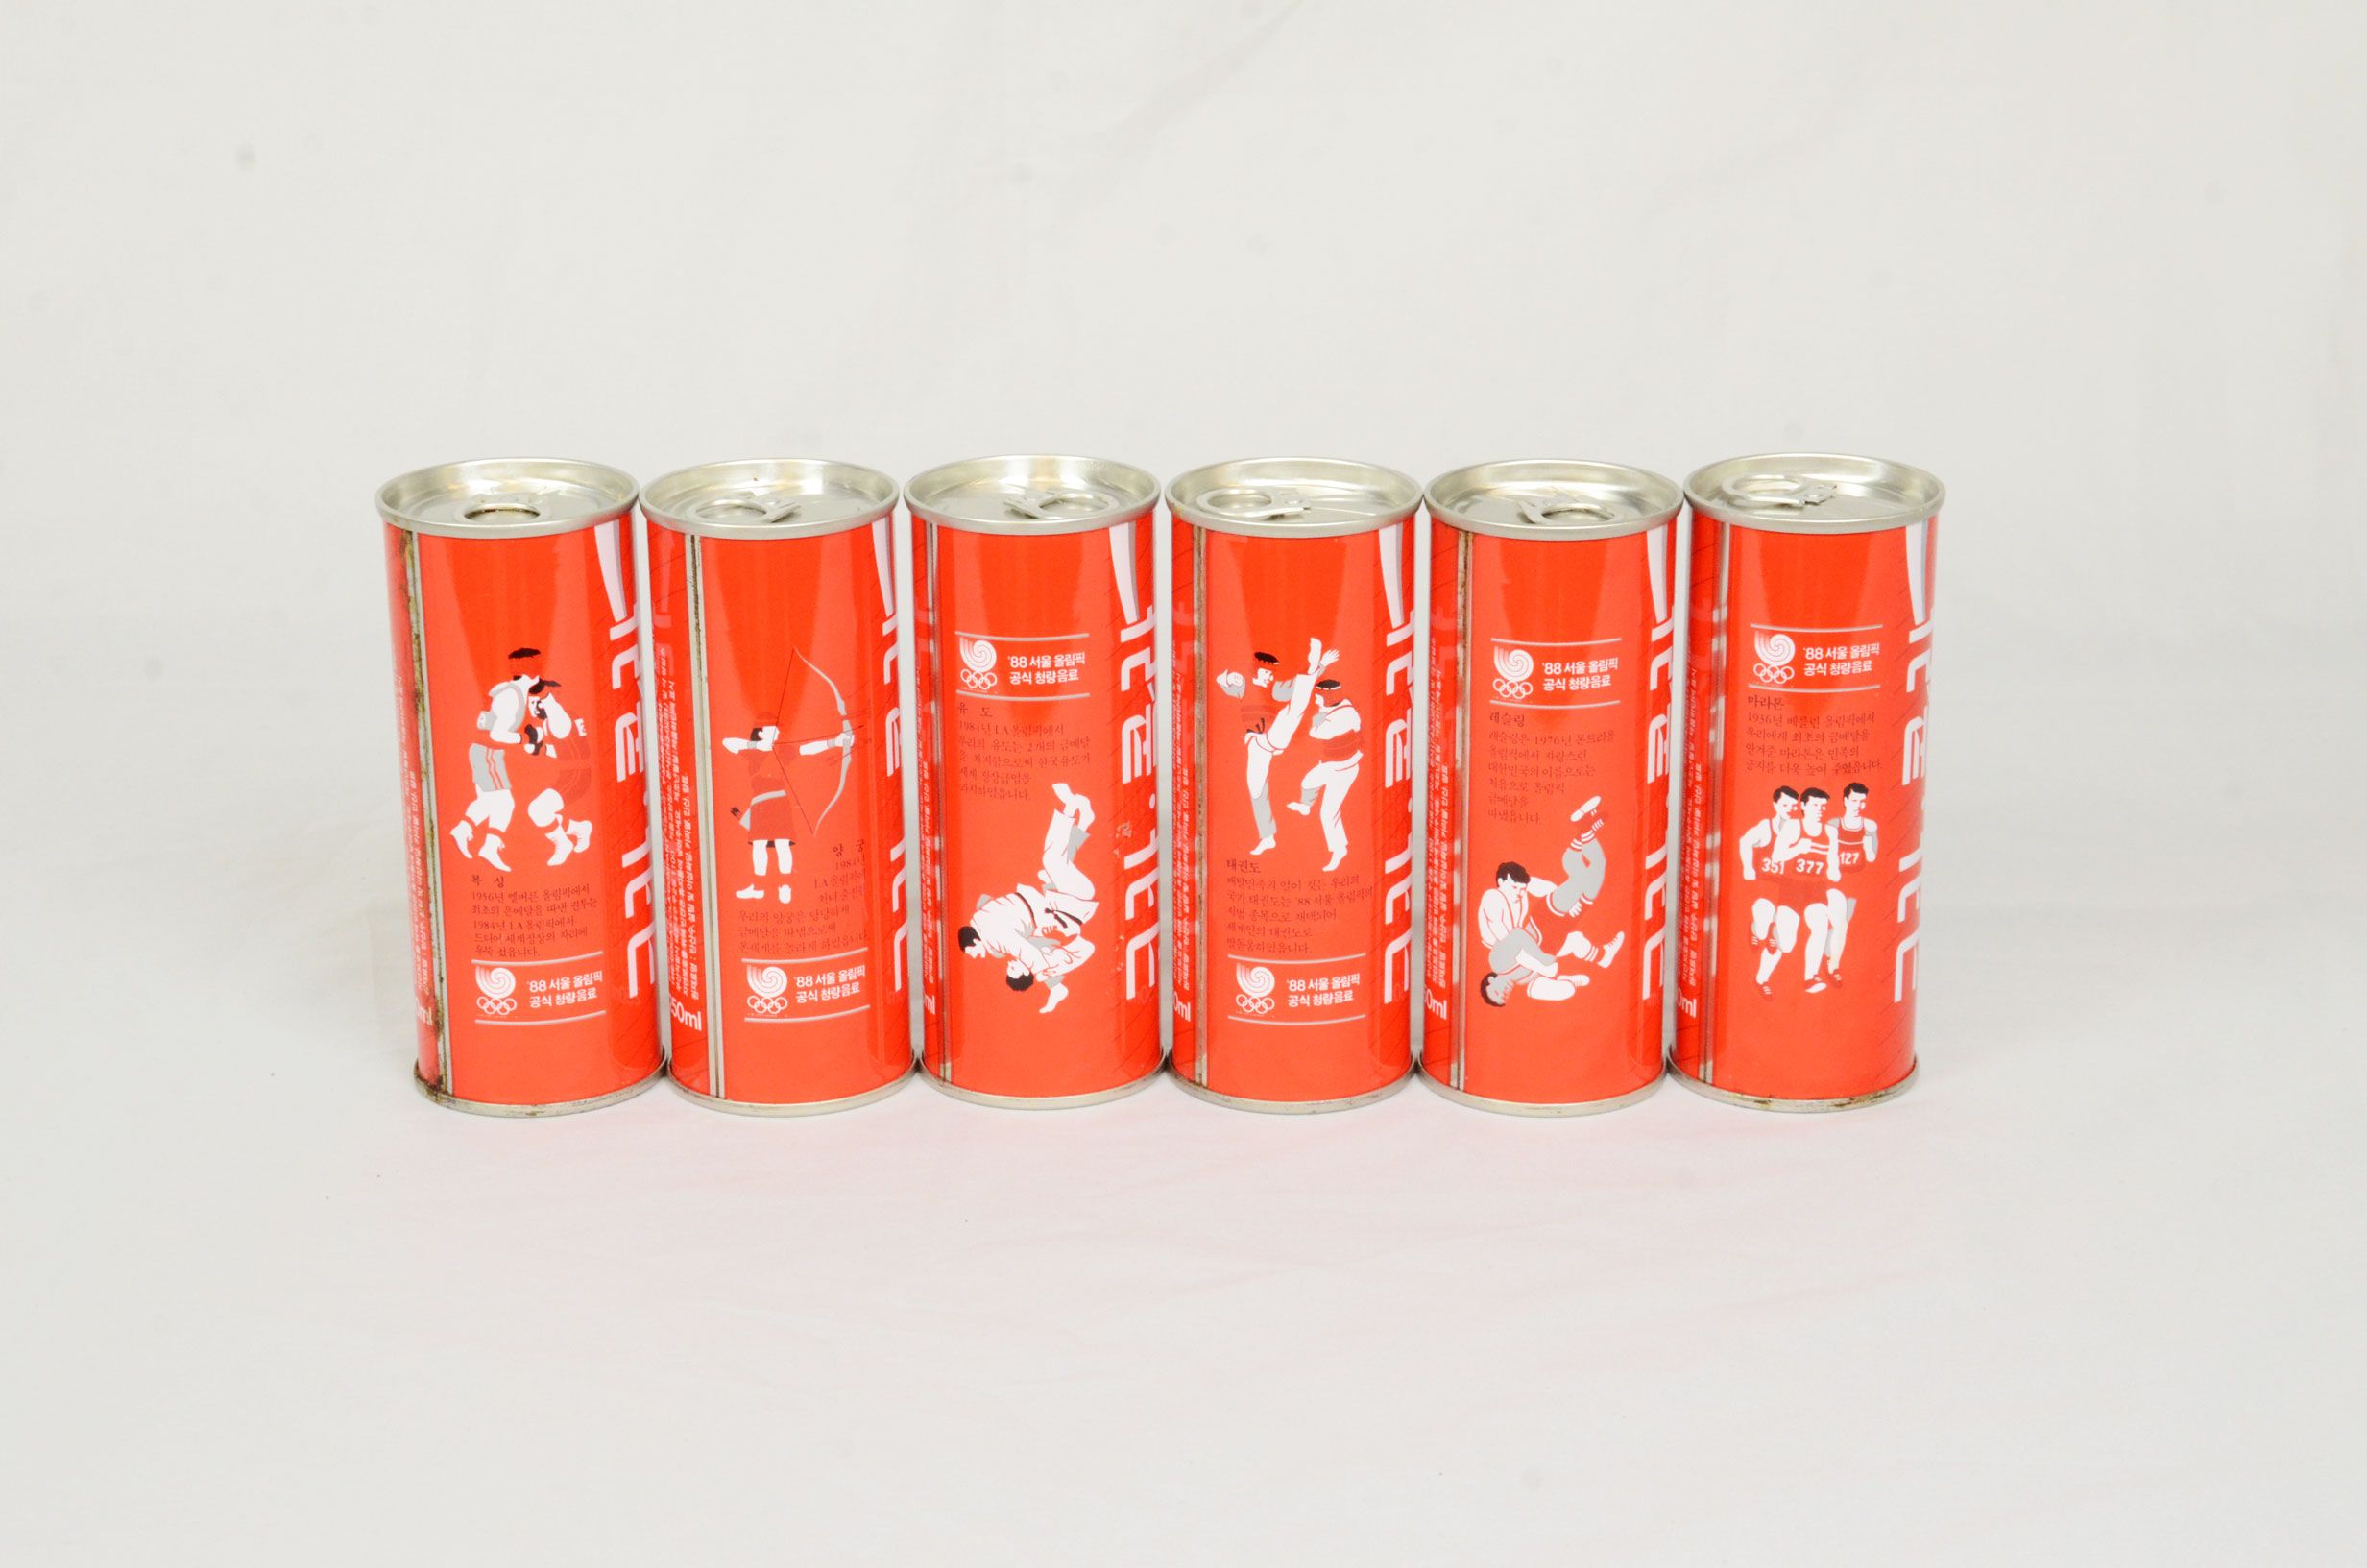 A set of 6 Coca-Cola cans from 1988 Olympics